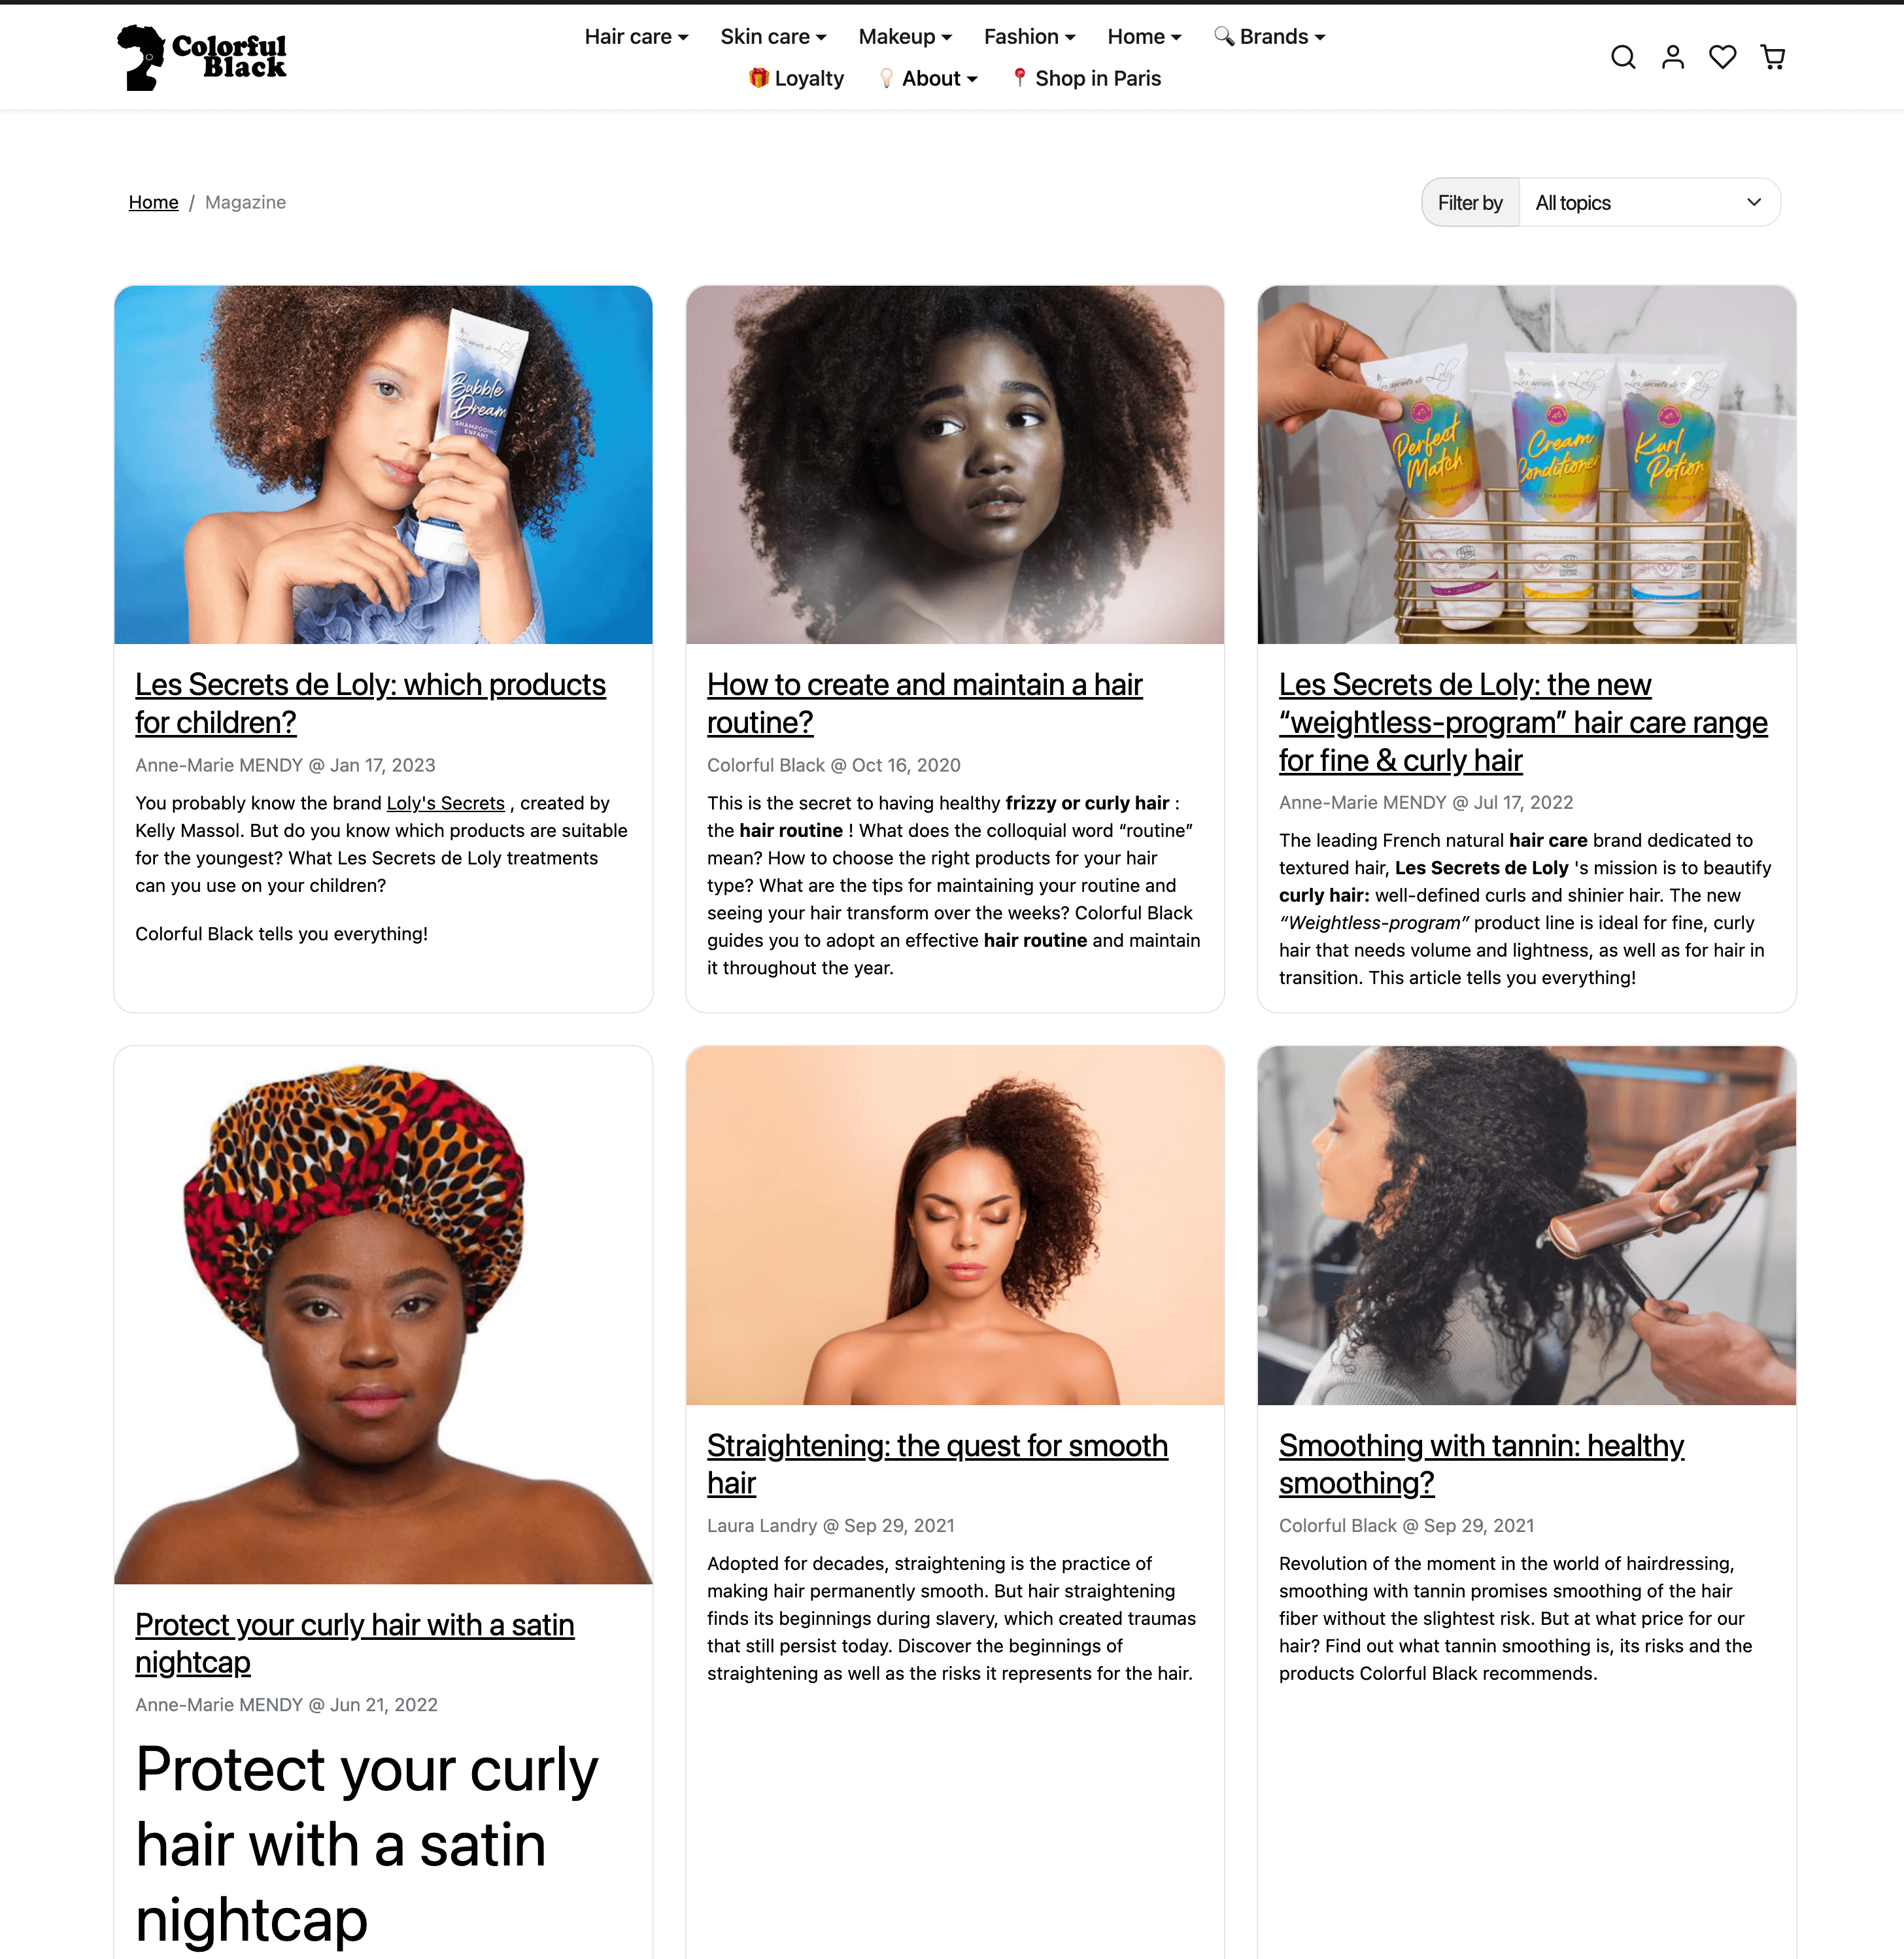 Mental Wellness Brands for World Mental Health Day–A screenshot of Colorful Black’s Magazine showing 6 different articles. 